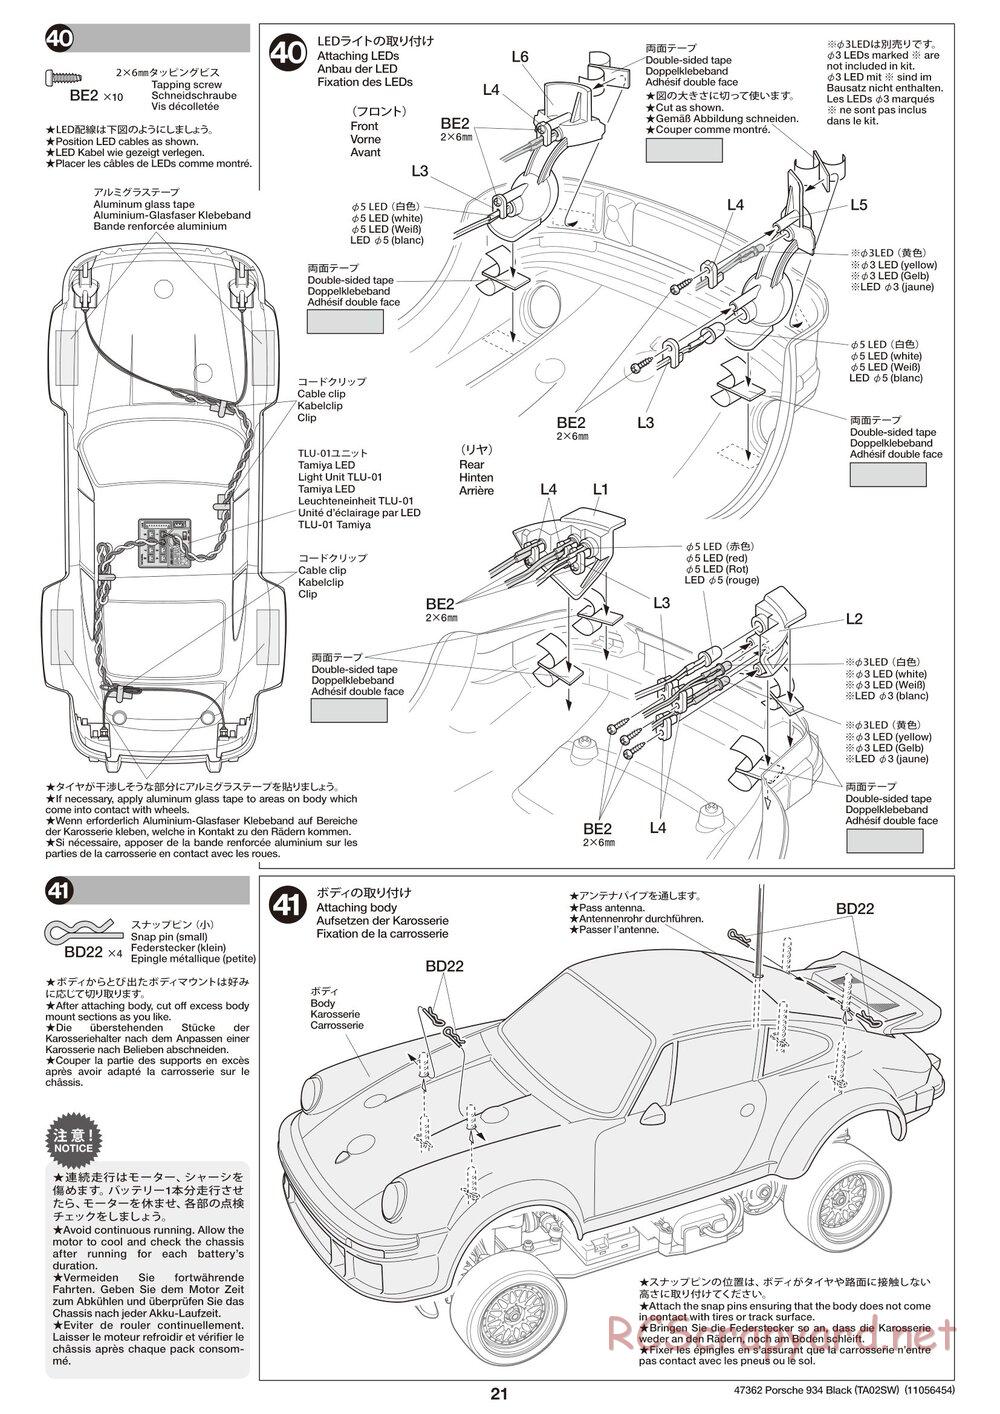 Tamiya - TT-02 White Special Chassis - Manual - Page 21